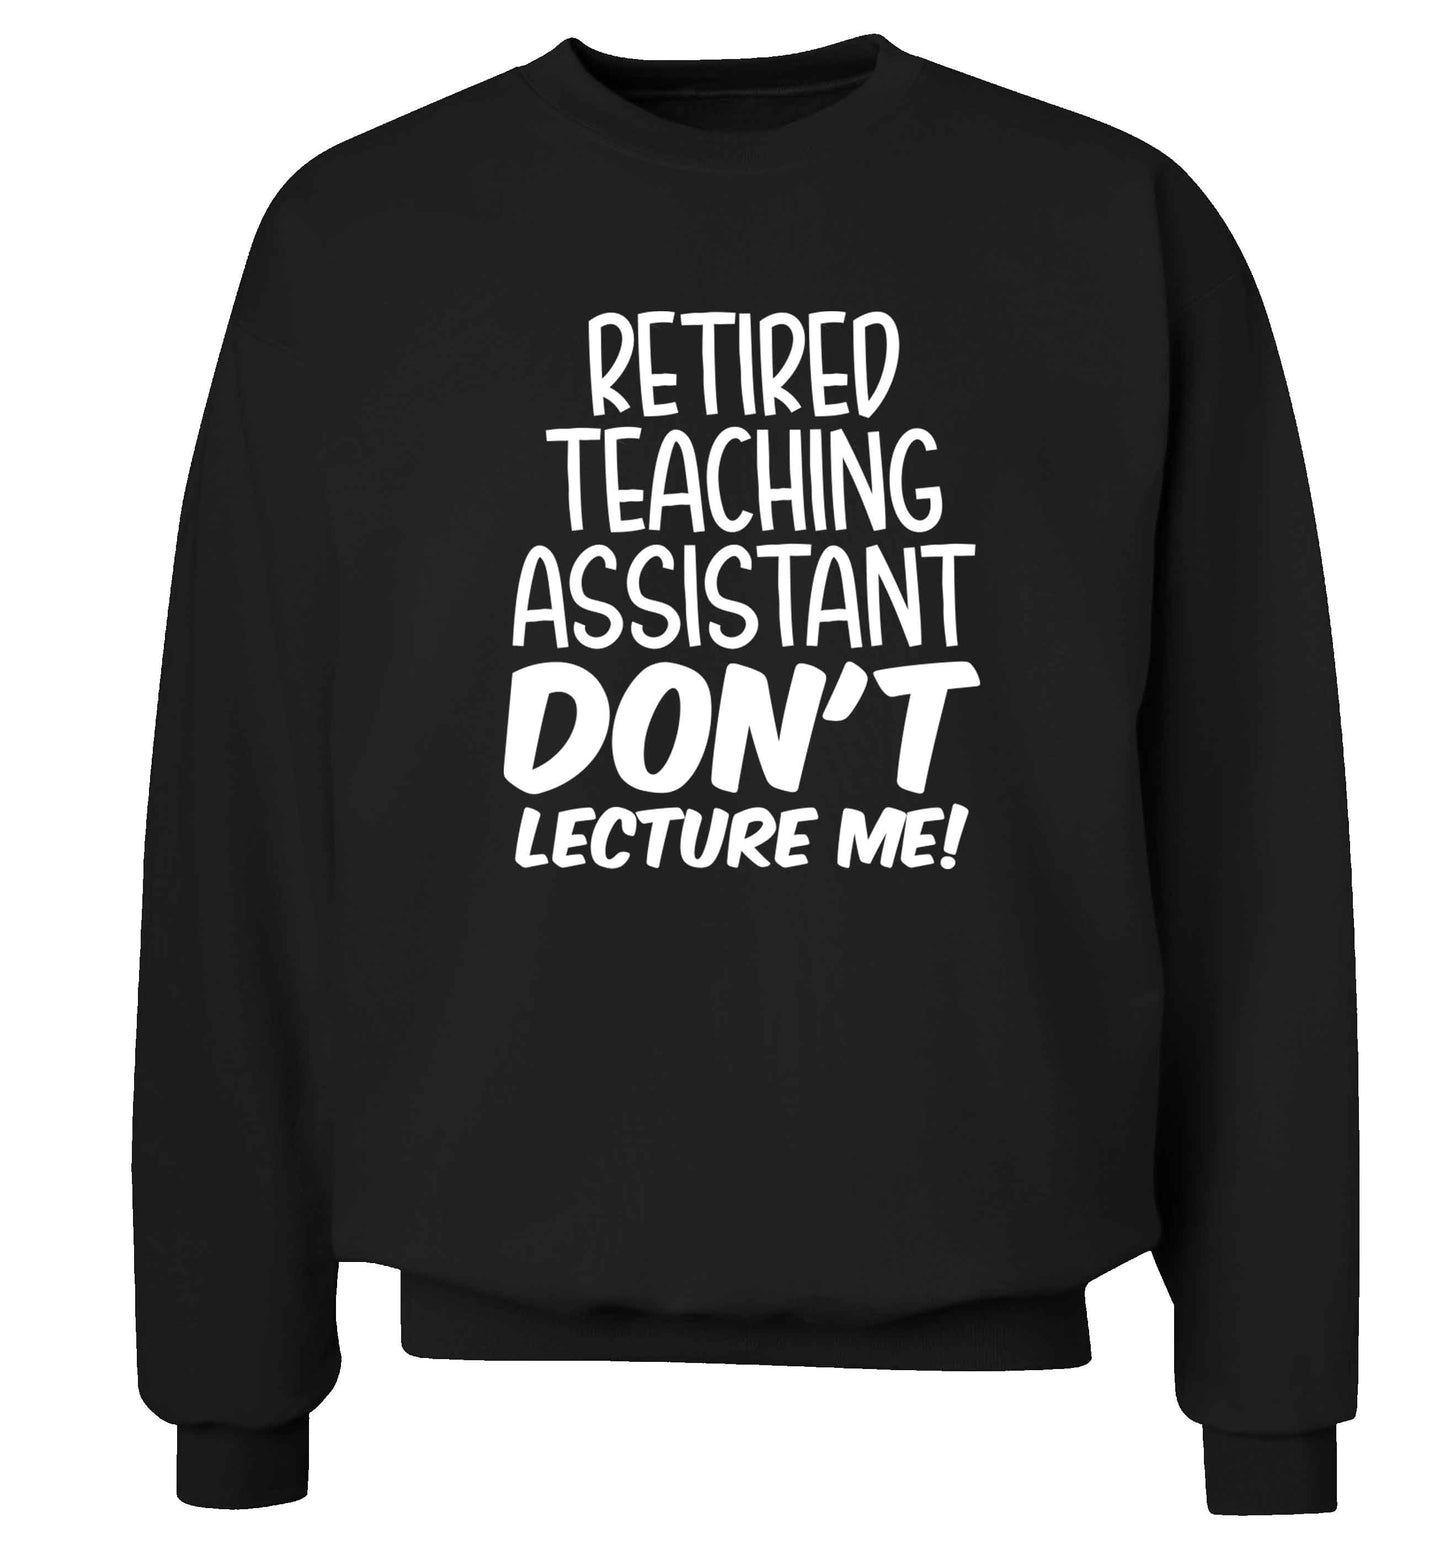 Retired teaching assistant don't lecture me Adult's unisex black Sweater 2XL